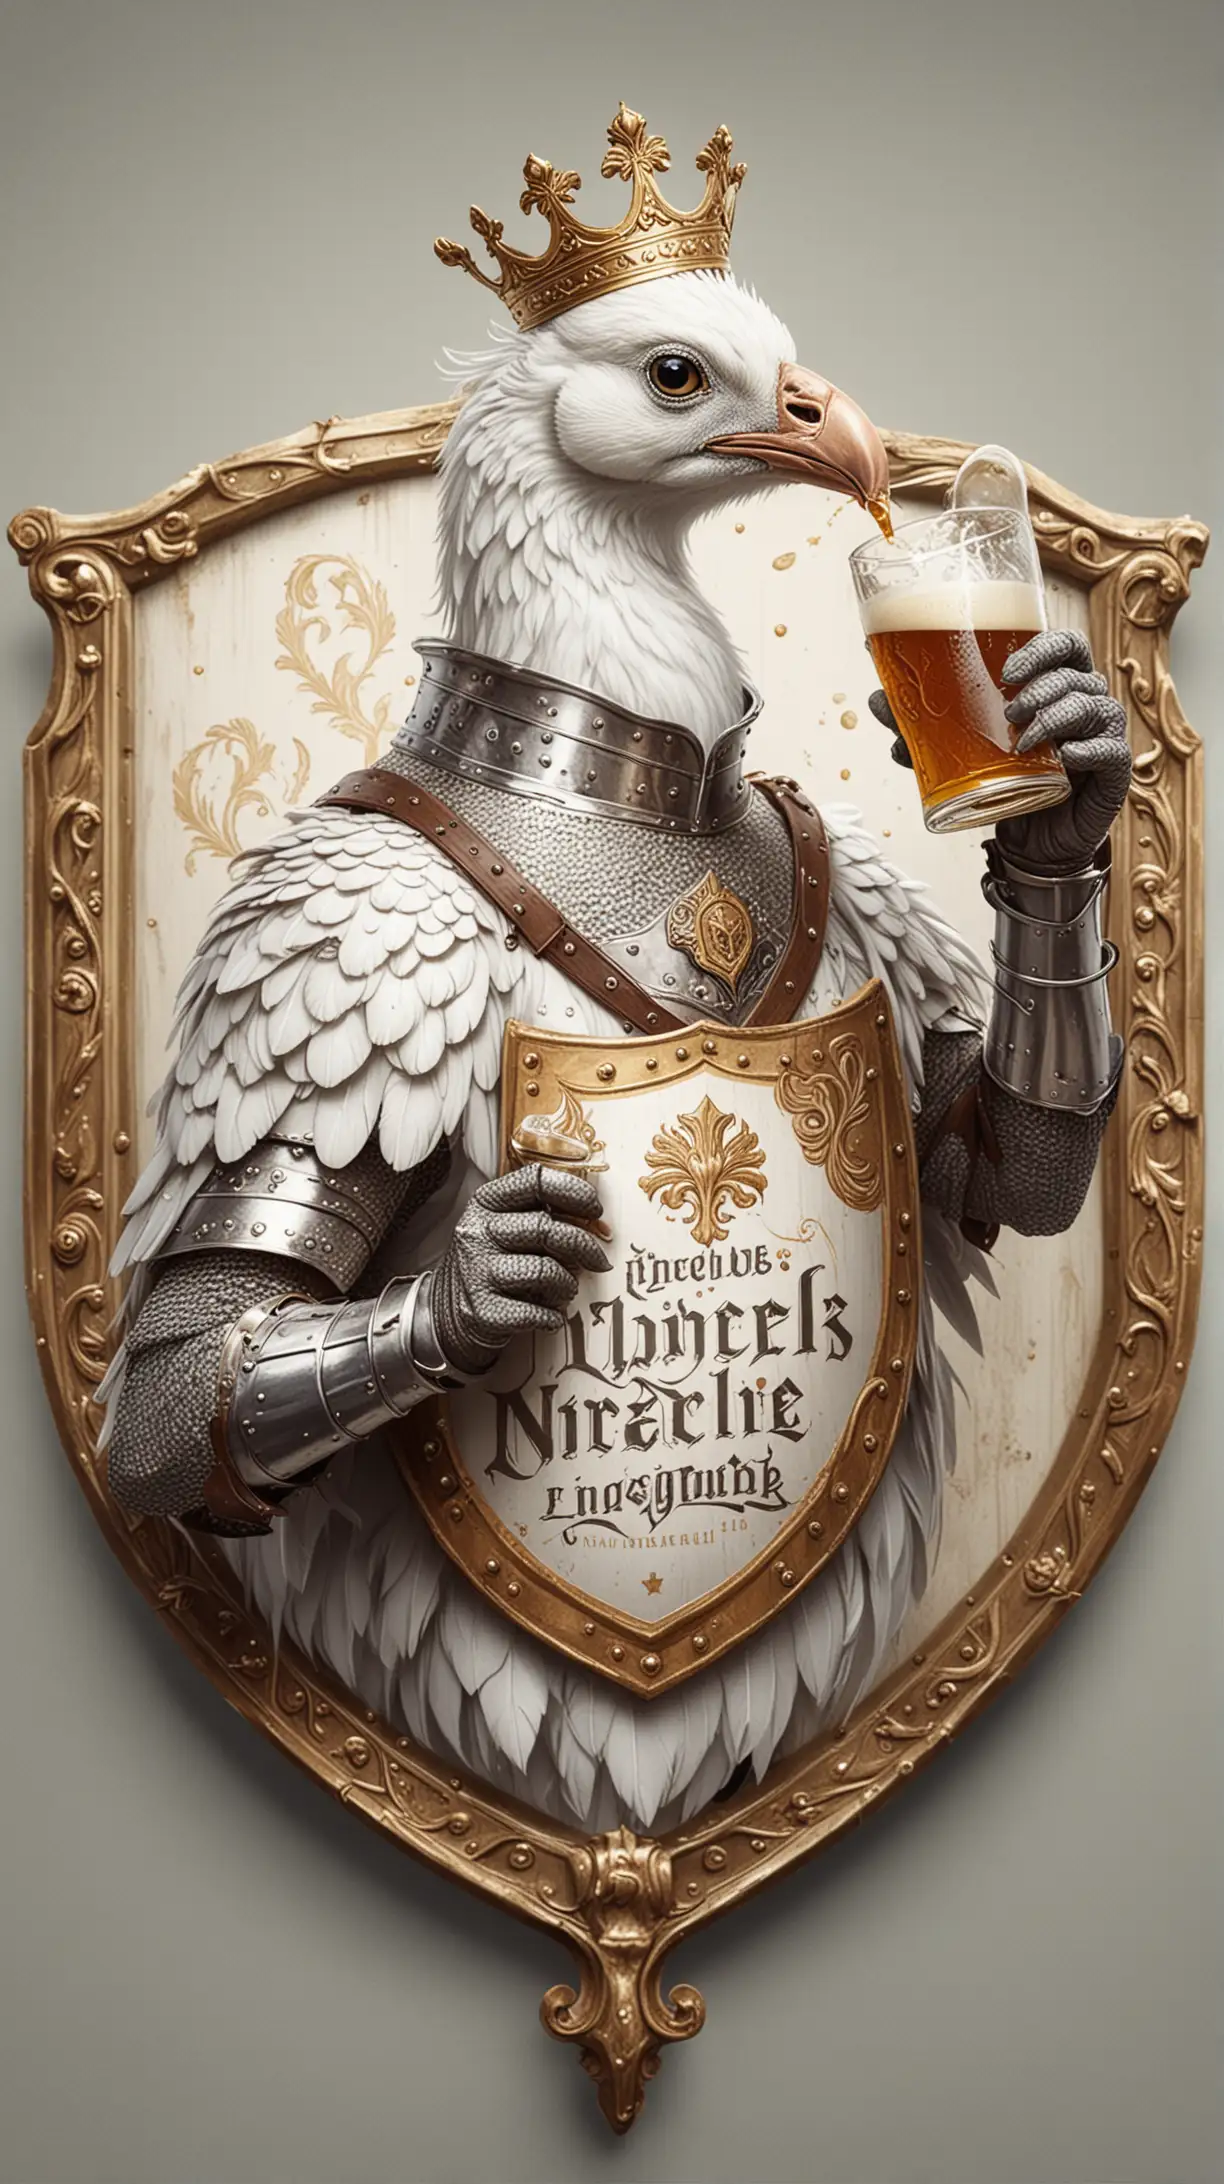 make me an logo from a white peacock dressed as a knight drinking beer presented on a knight's shield.
Use the text Witte Pauwen